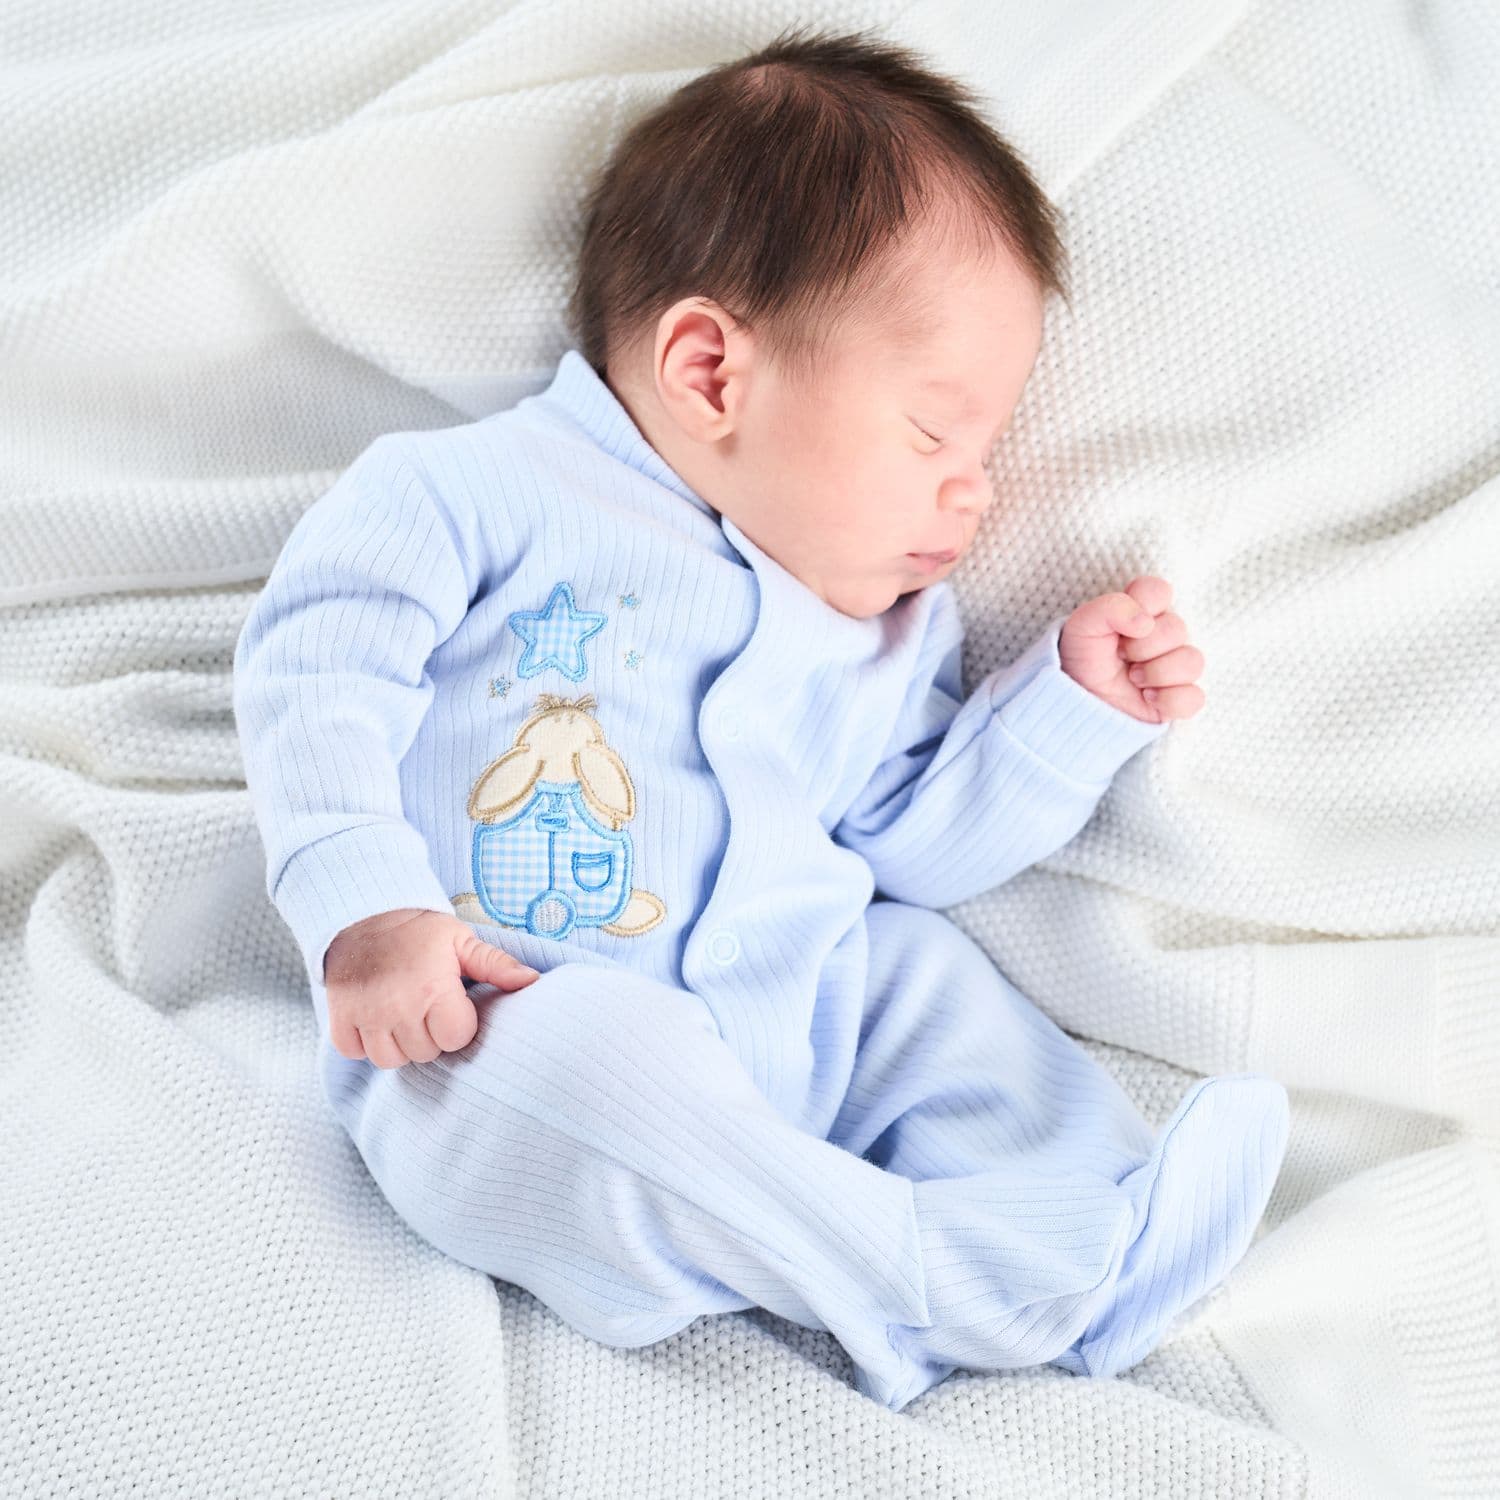 This blue ribbed sleepsuit is designed specifically for premature baby boys by Dandelion, providing maximum comfort and breathability. Made from 100% cotton, it features a charming rabbit and teddy motif and convenient push button fastening. Available in sizes 3-5lbs and 5-8lbs, this sleepsuit is perfect for your little one's delicate needs.